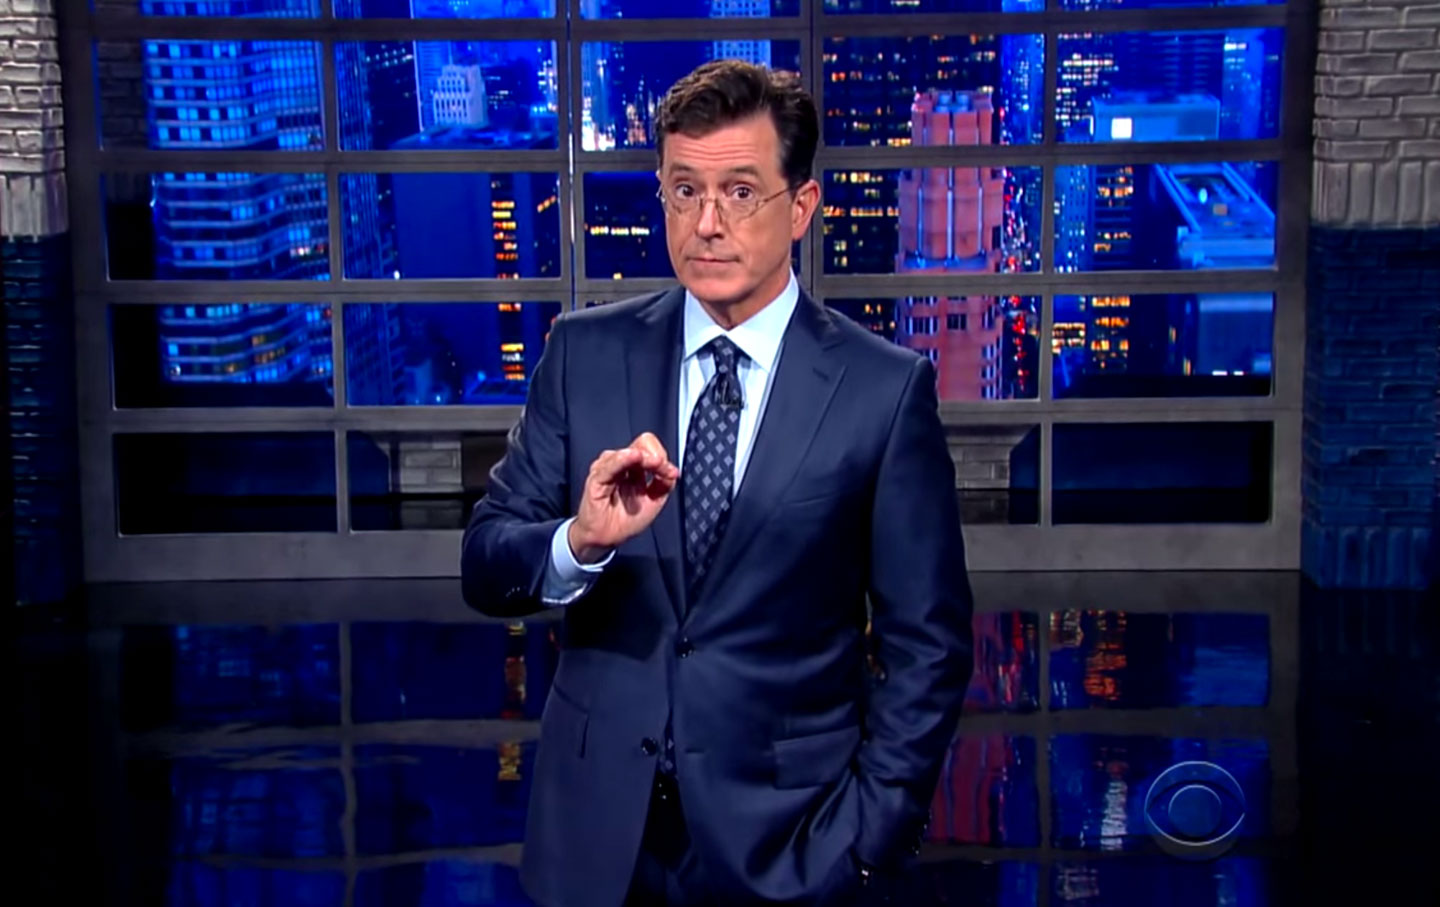 Are Colbert’s New Politics Softer, or Just More Subtle?